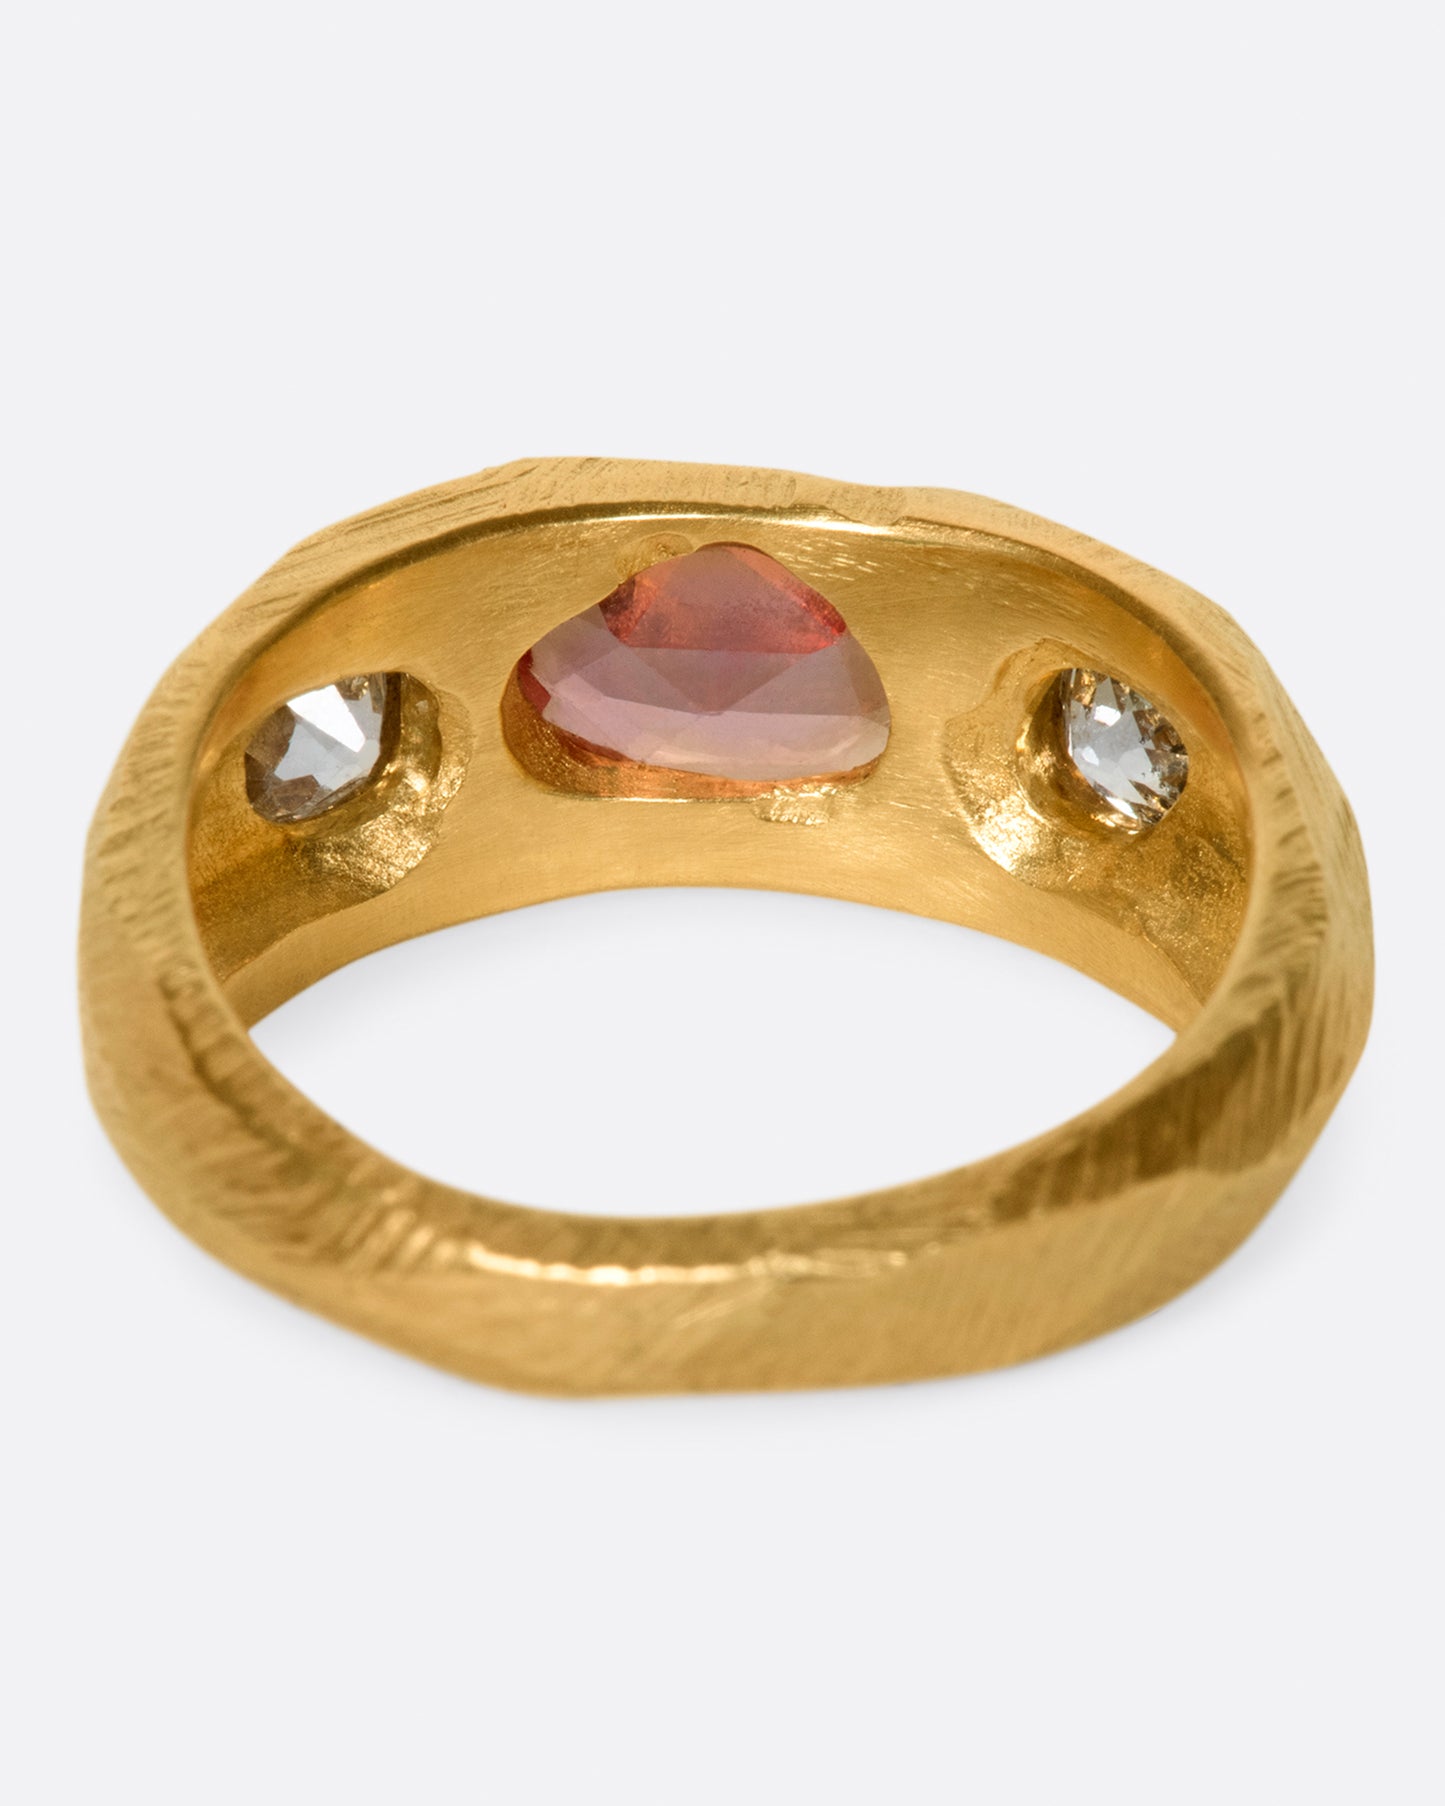 A one of a kind, hand carved ring with an oval rose cut orange sapphire and old mind cut white diamonds on either side.